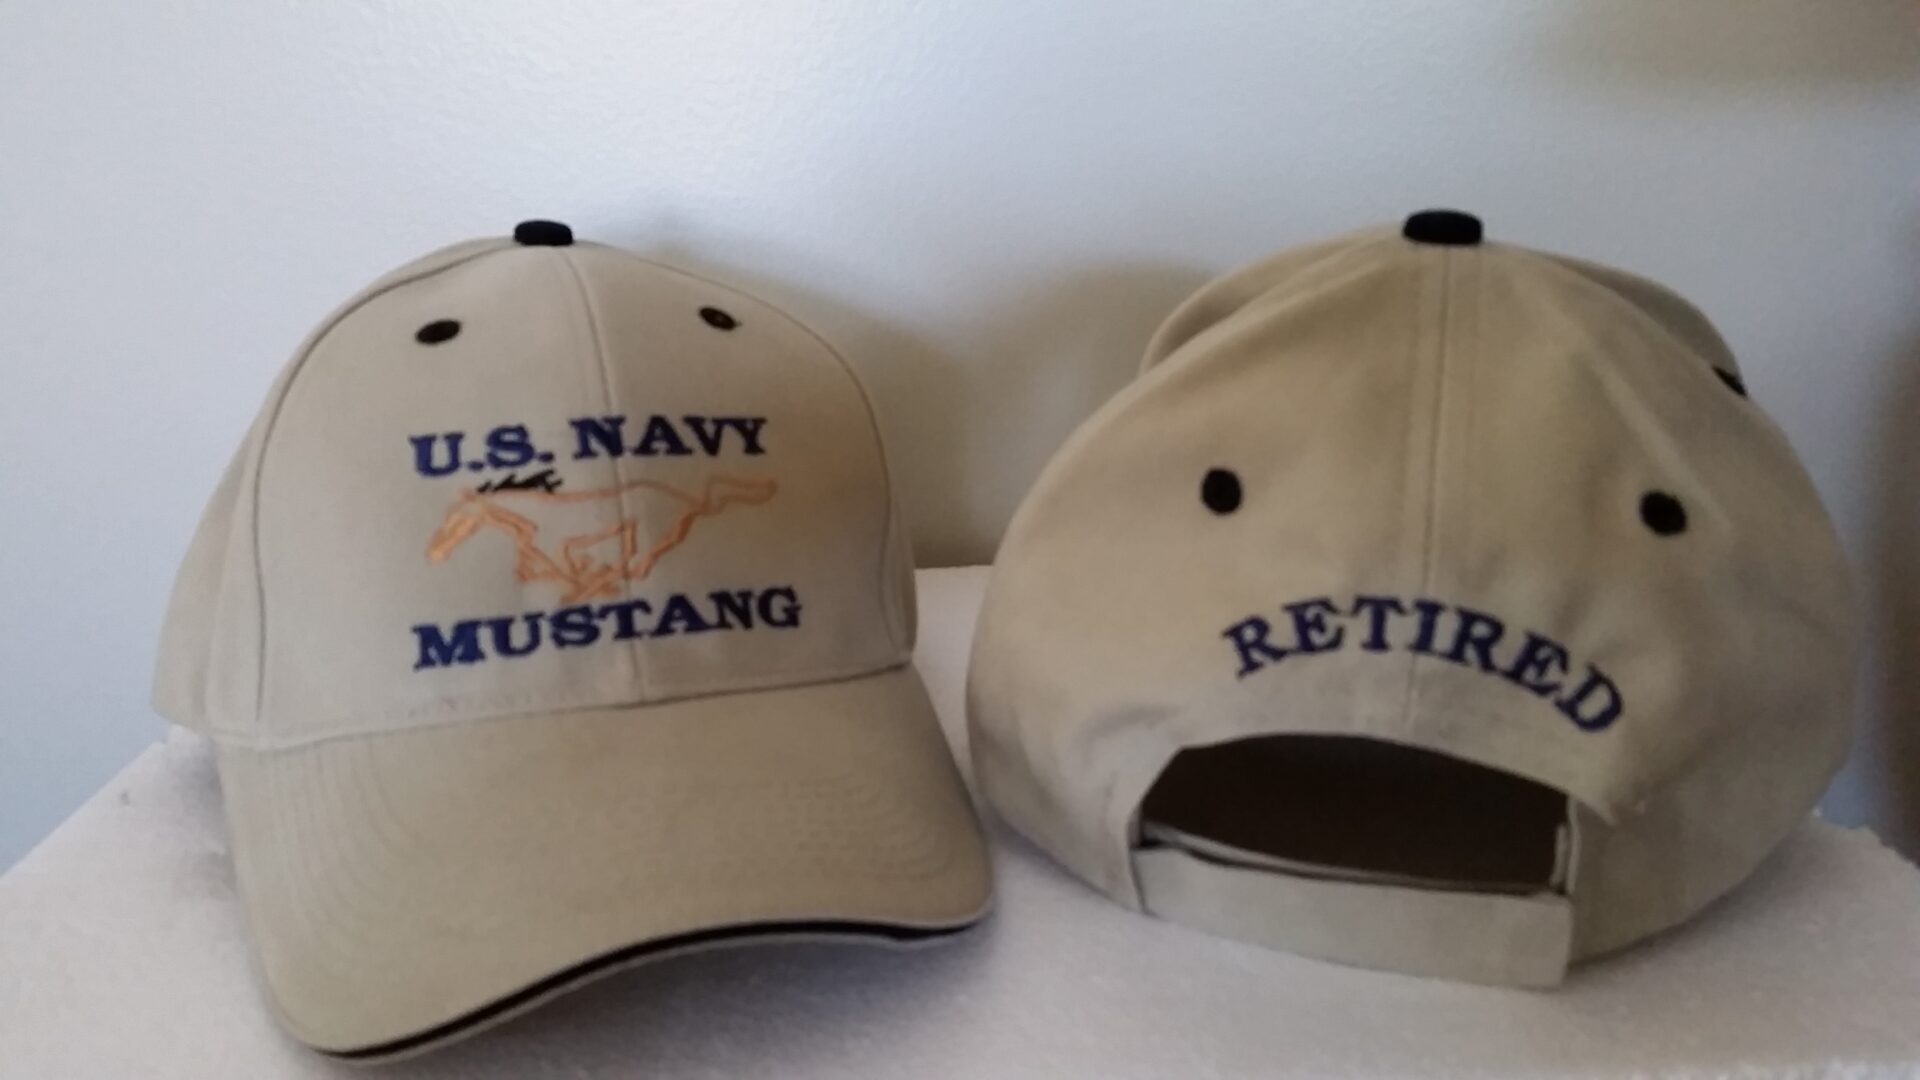 | Mustang NAVY Navy BALL MUSTANG CAPS Store The